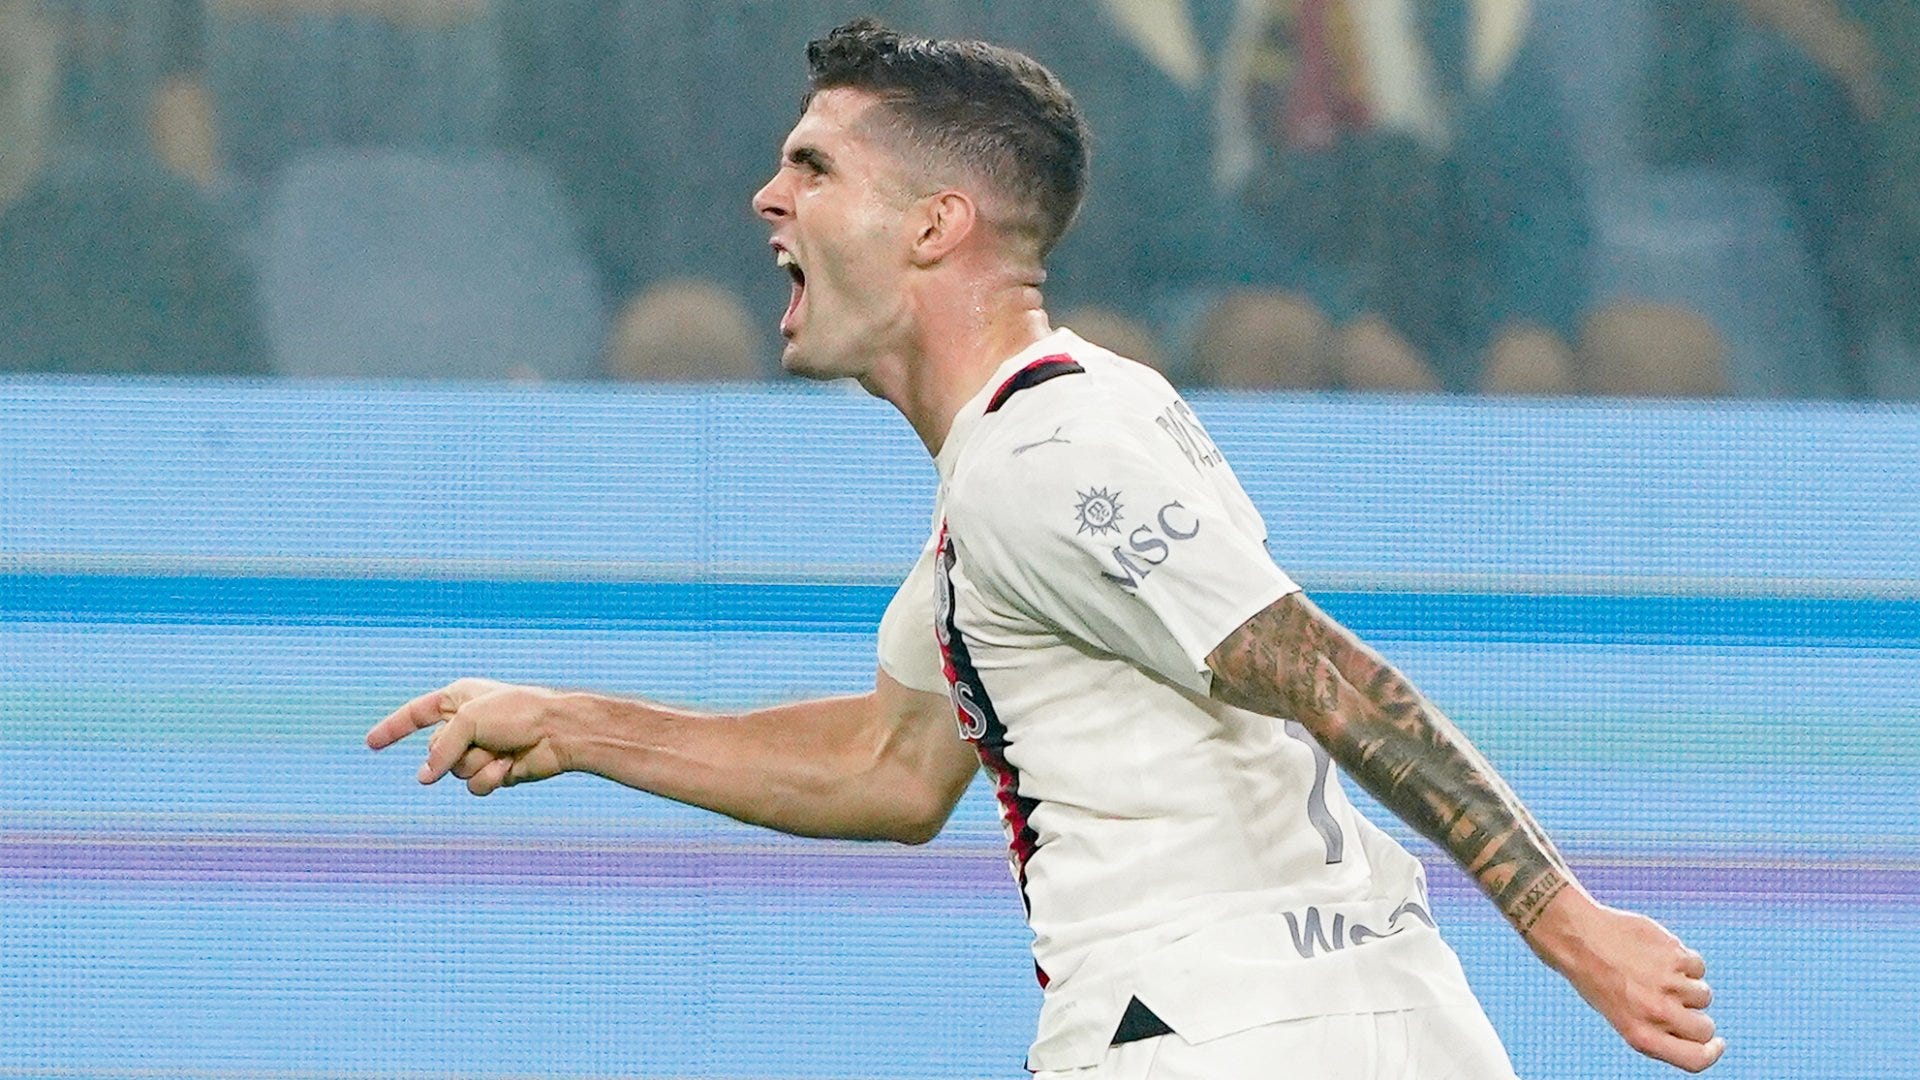 Made in the USA! USMNT stars Christian Pulisic and Yunus Musah combine as AC Milan top Genoa in chaotic clash that sees both goalkeepes sent off